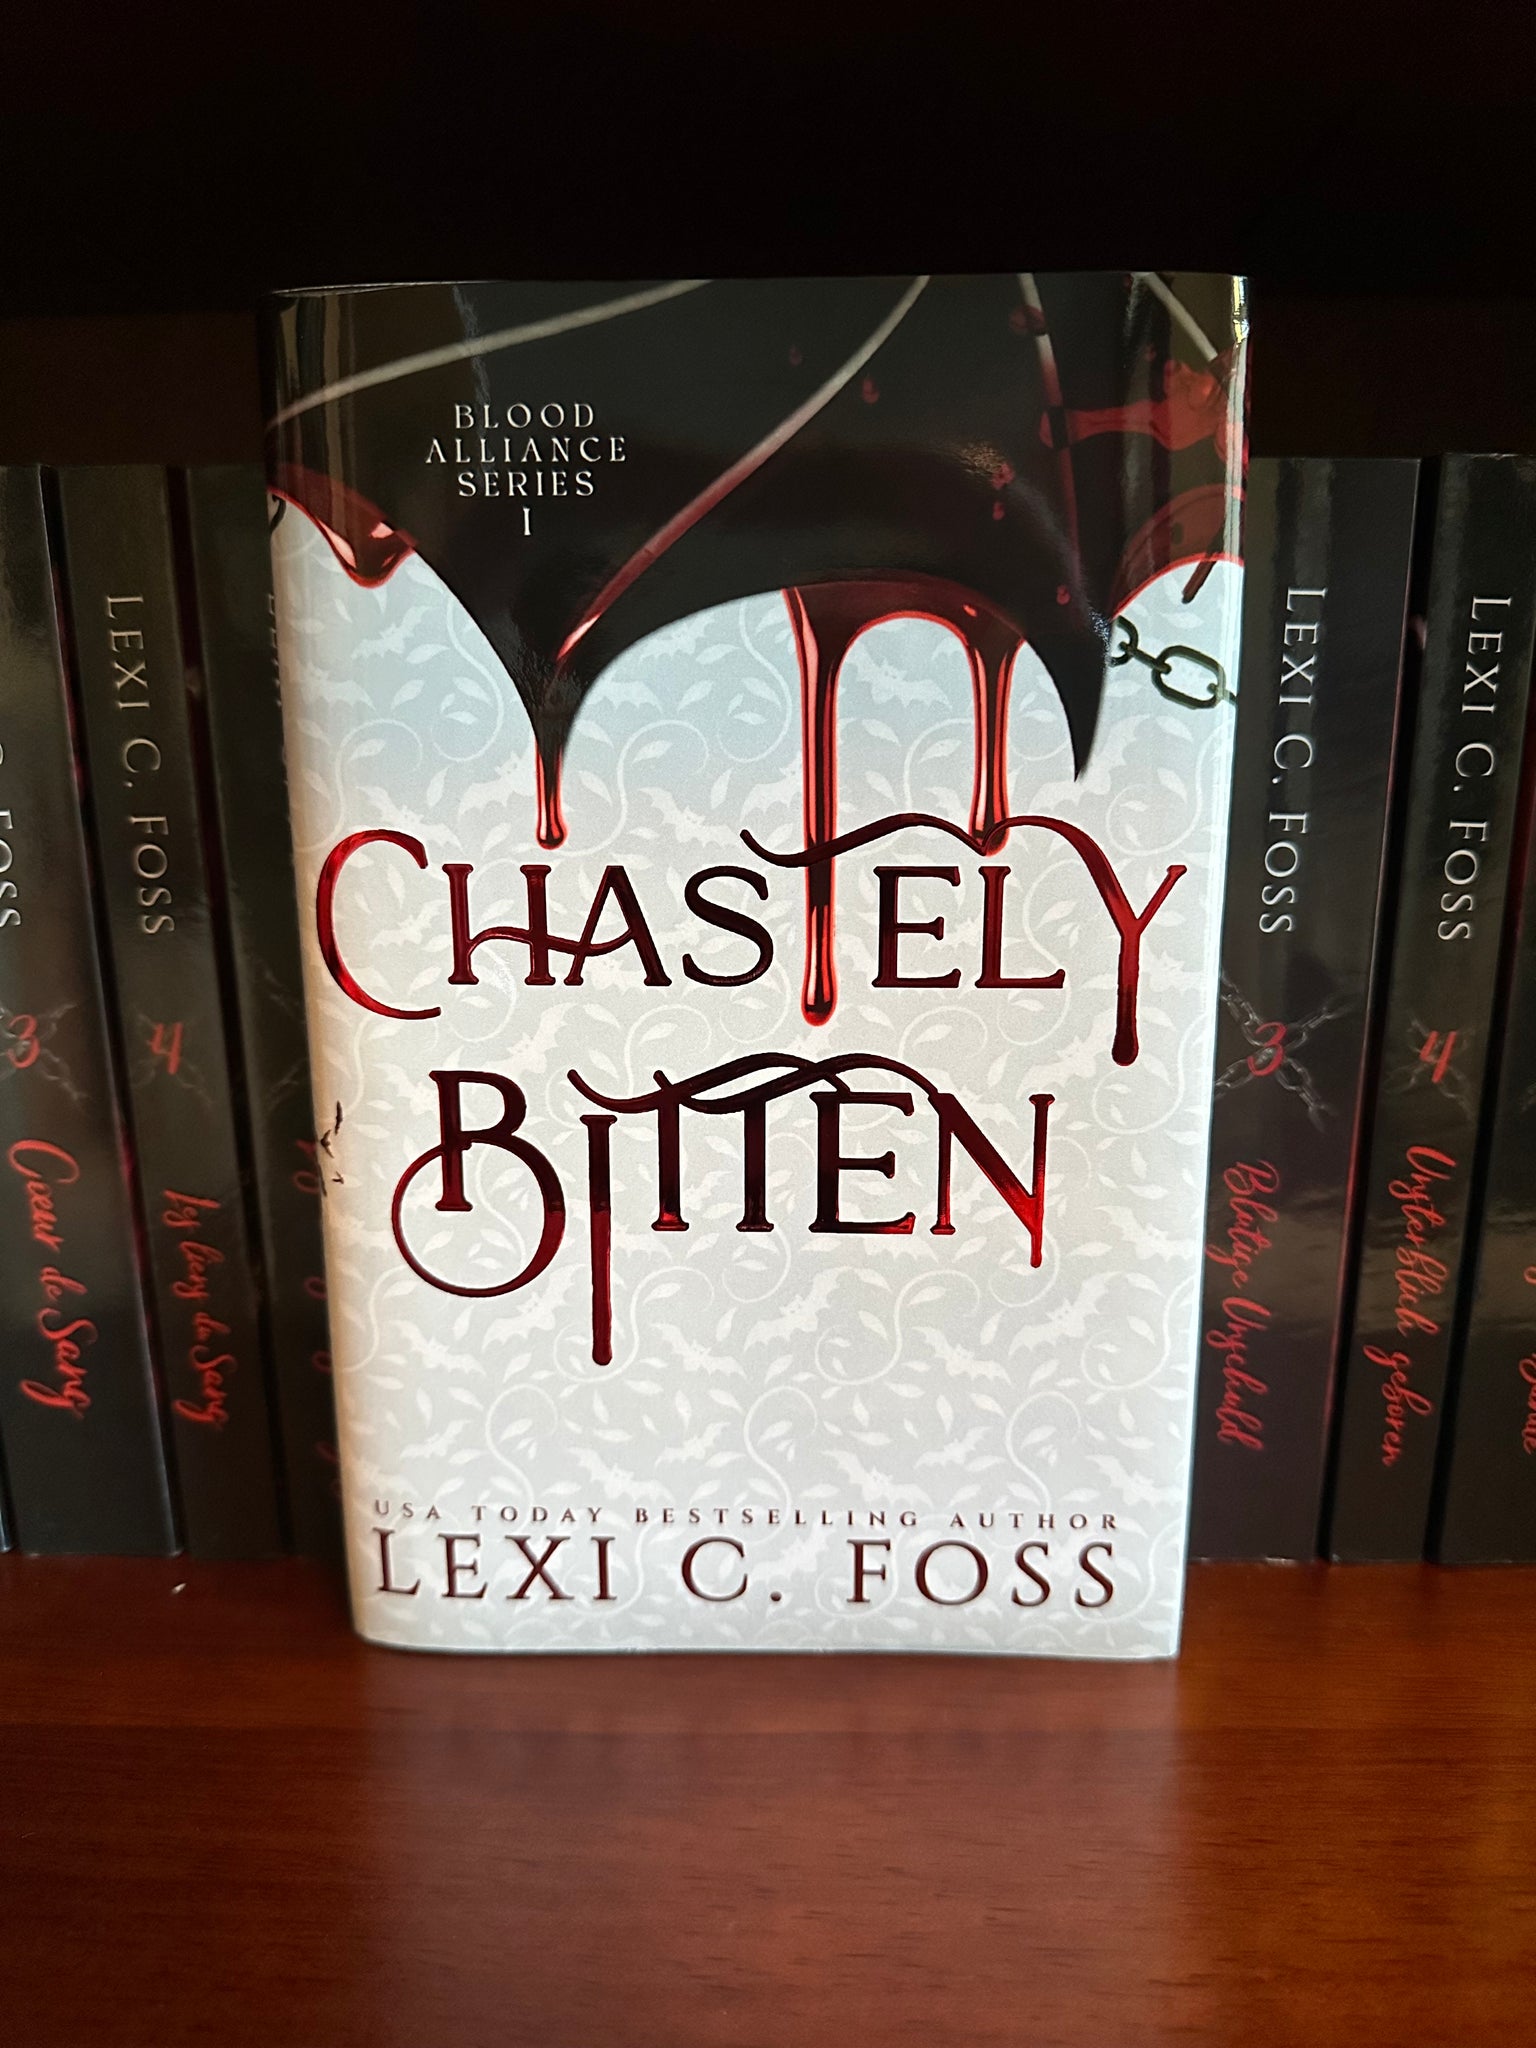 Chastely Bitten- Hardcover- Foiled with No Edging (Blood Alliance: Book 1)